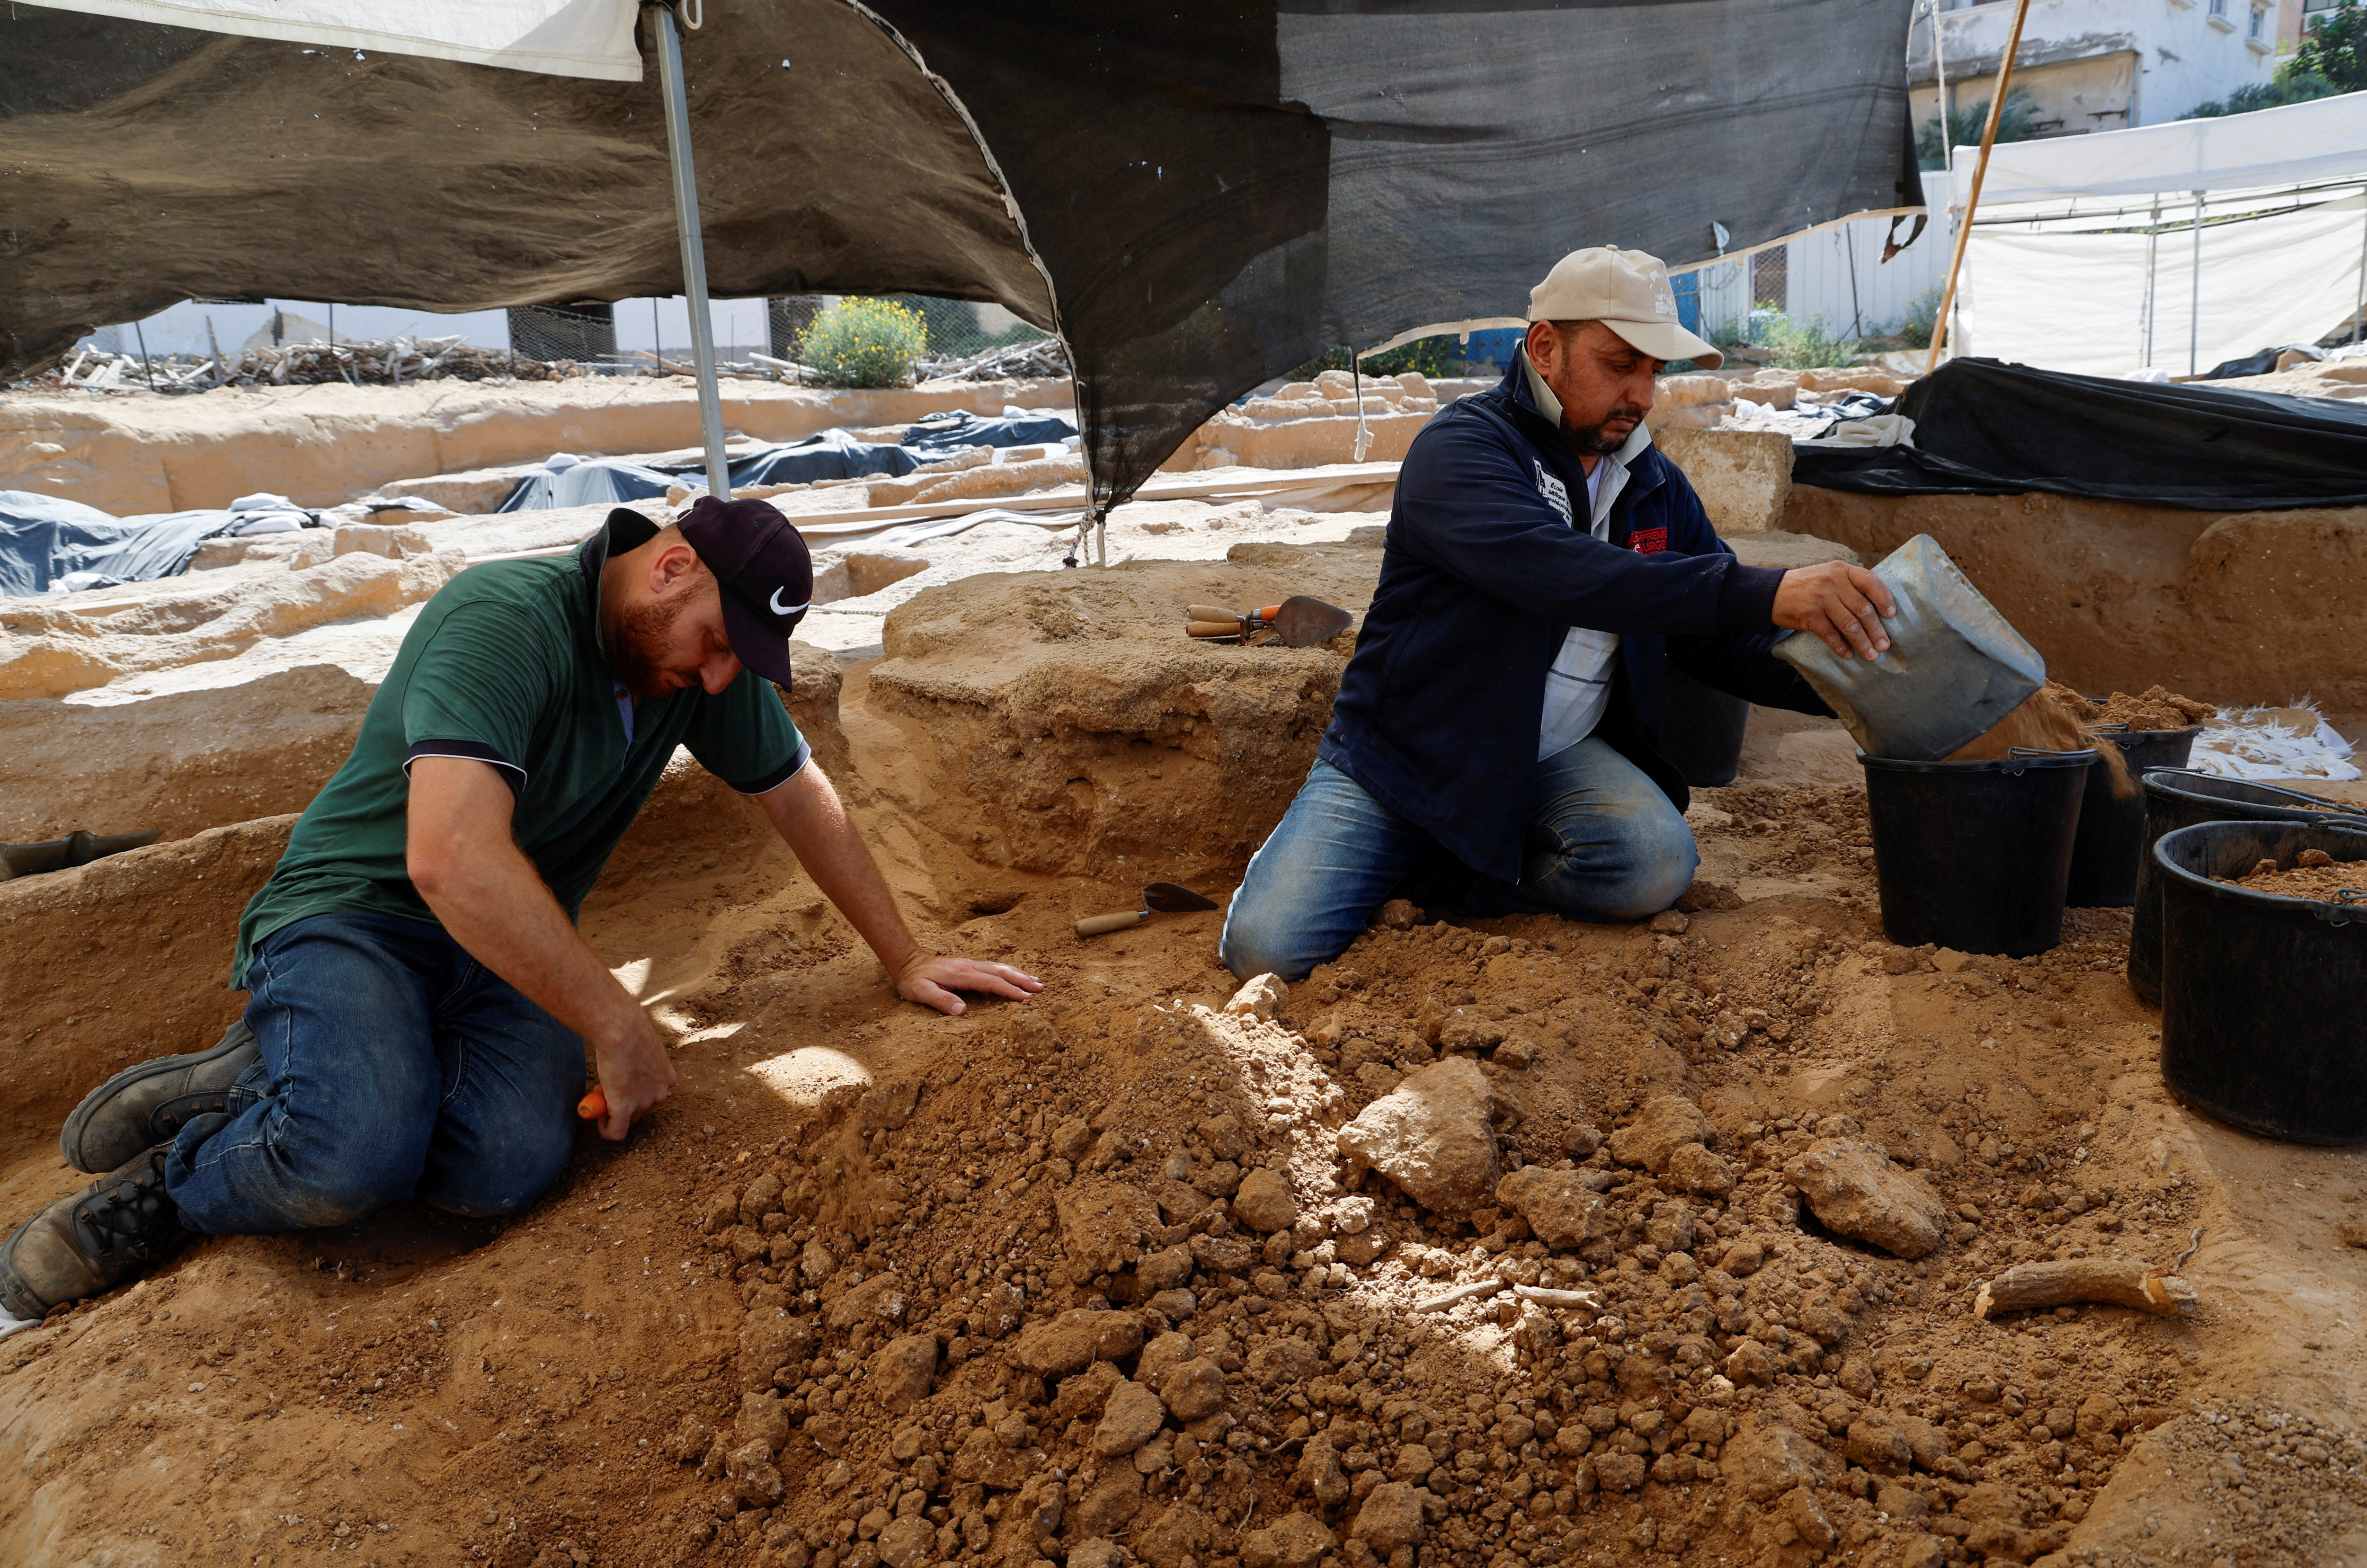 At least 125 tombs discovered at Roman-era cemetery in Gaza | Reuters